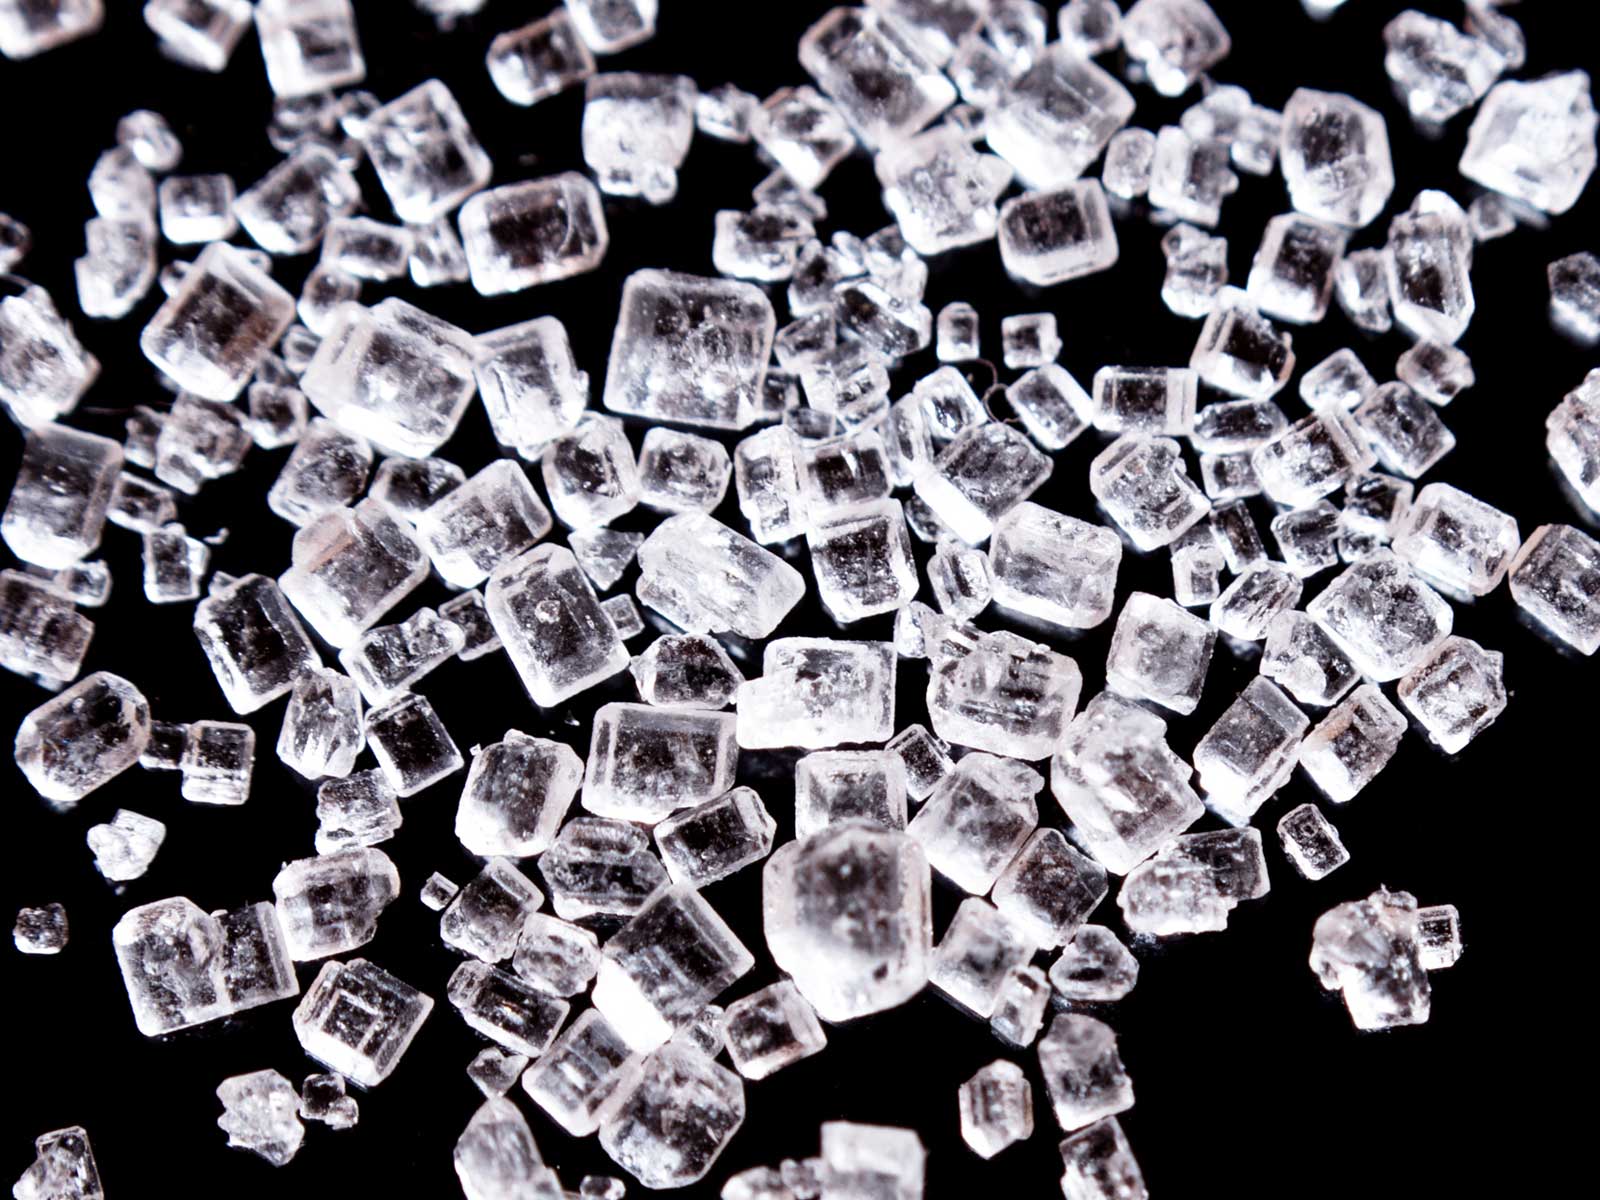 Square crystals on black background